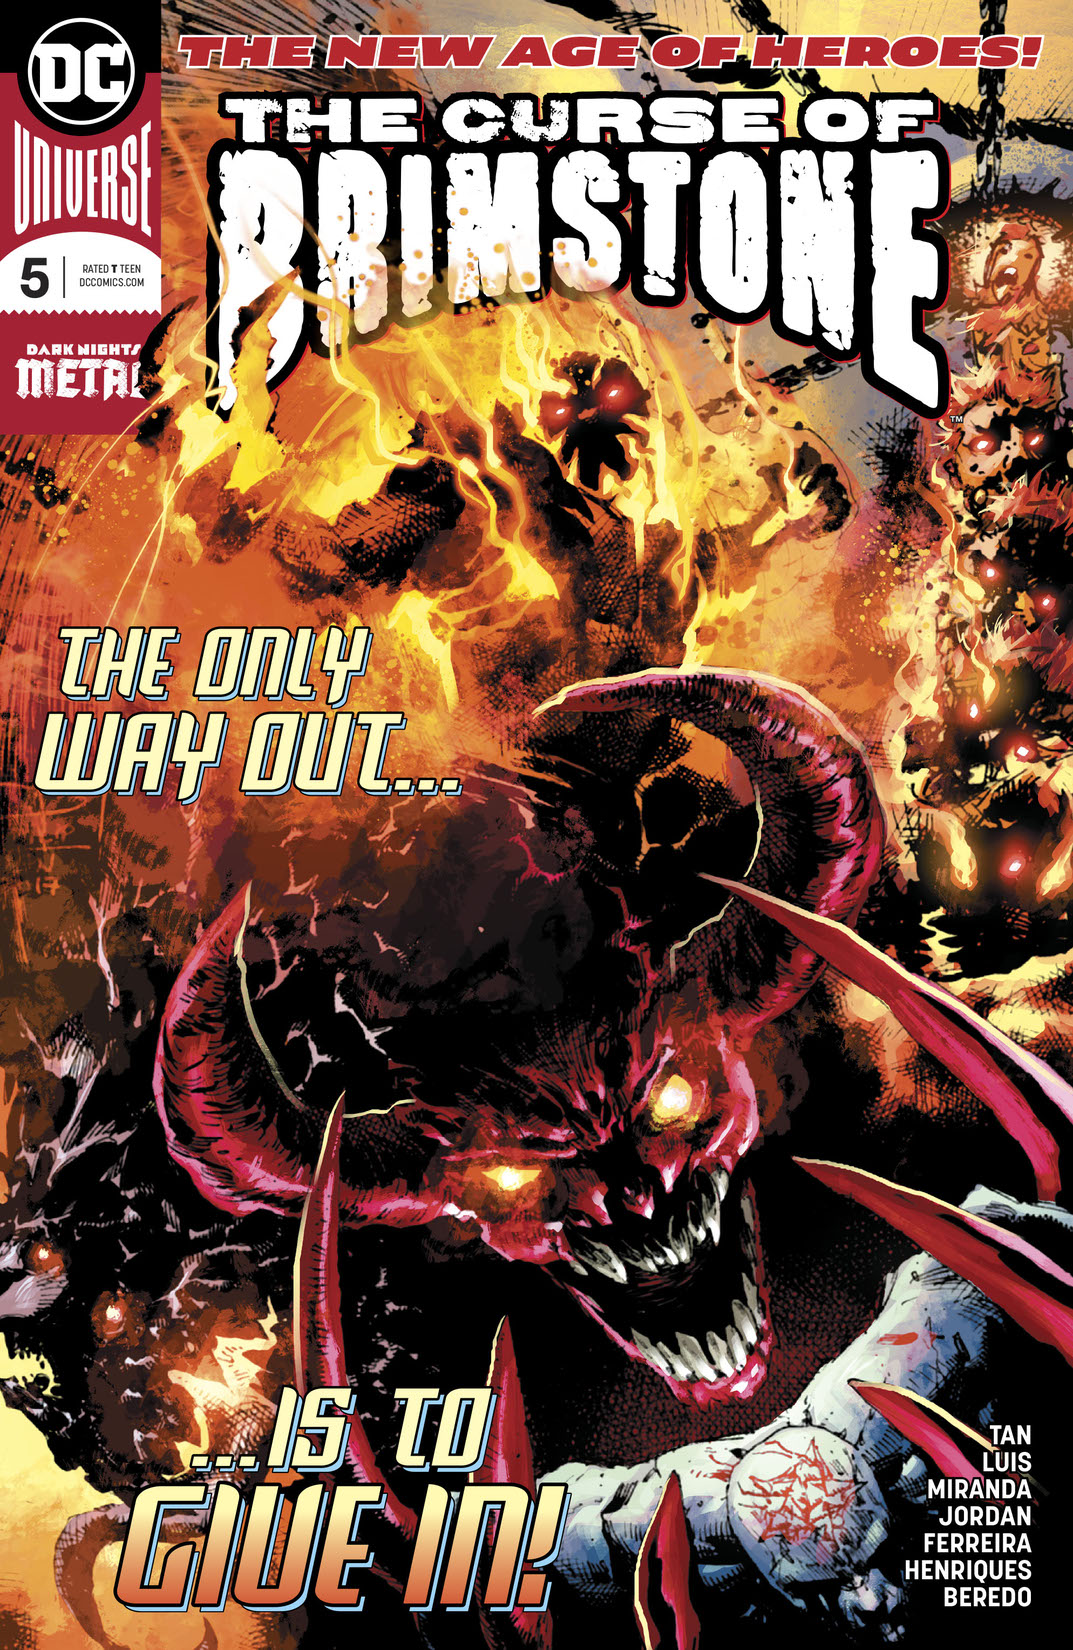 The Curse of Brimstone #5 preview images